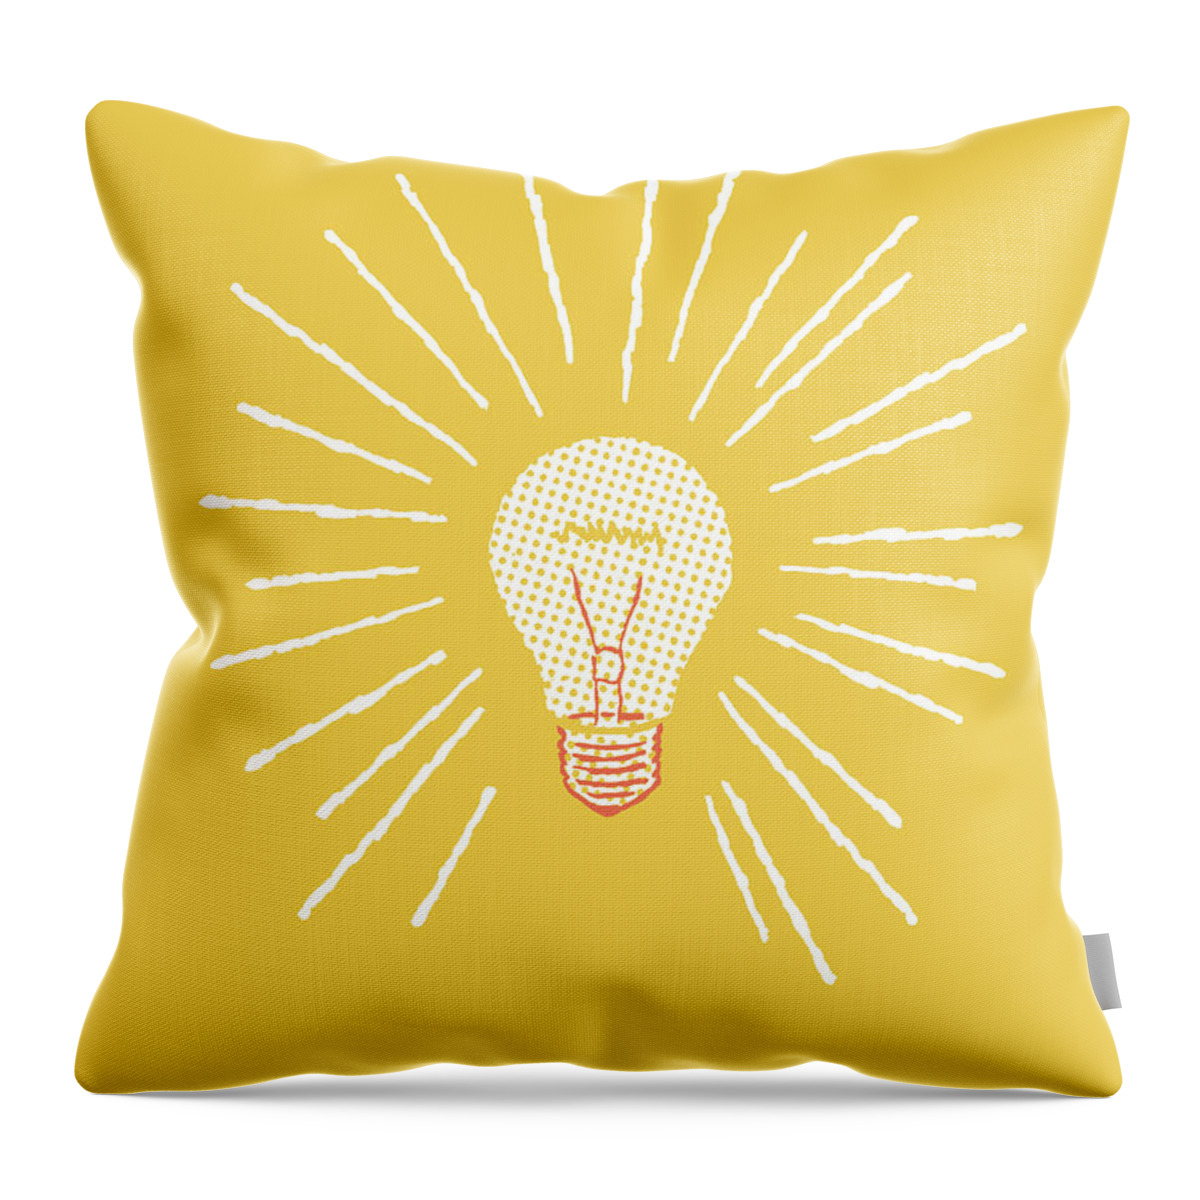 Bright Throw Pillow featuring the drawing Shining Lightbulb by CSA Images